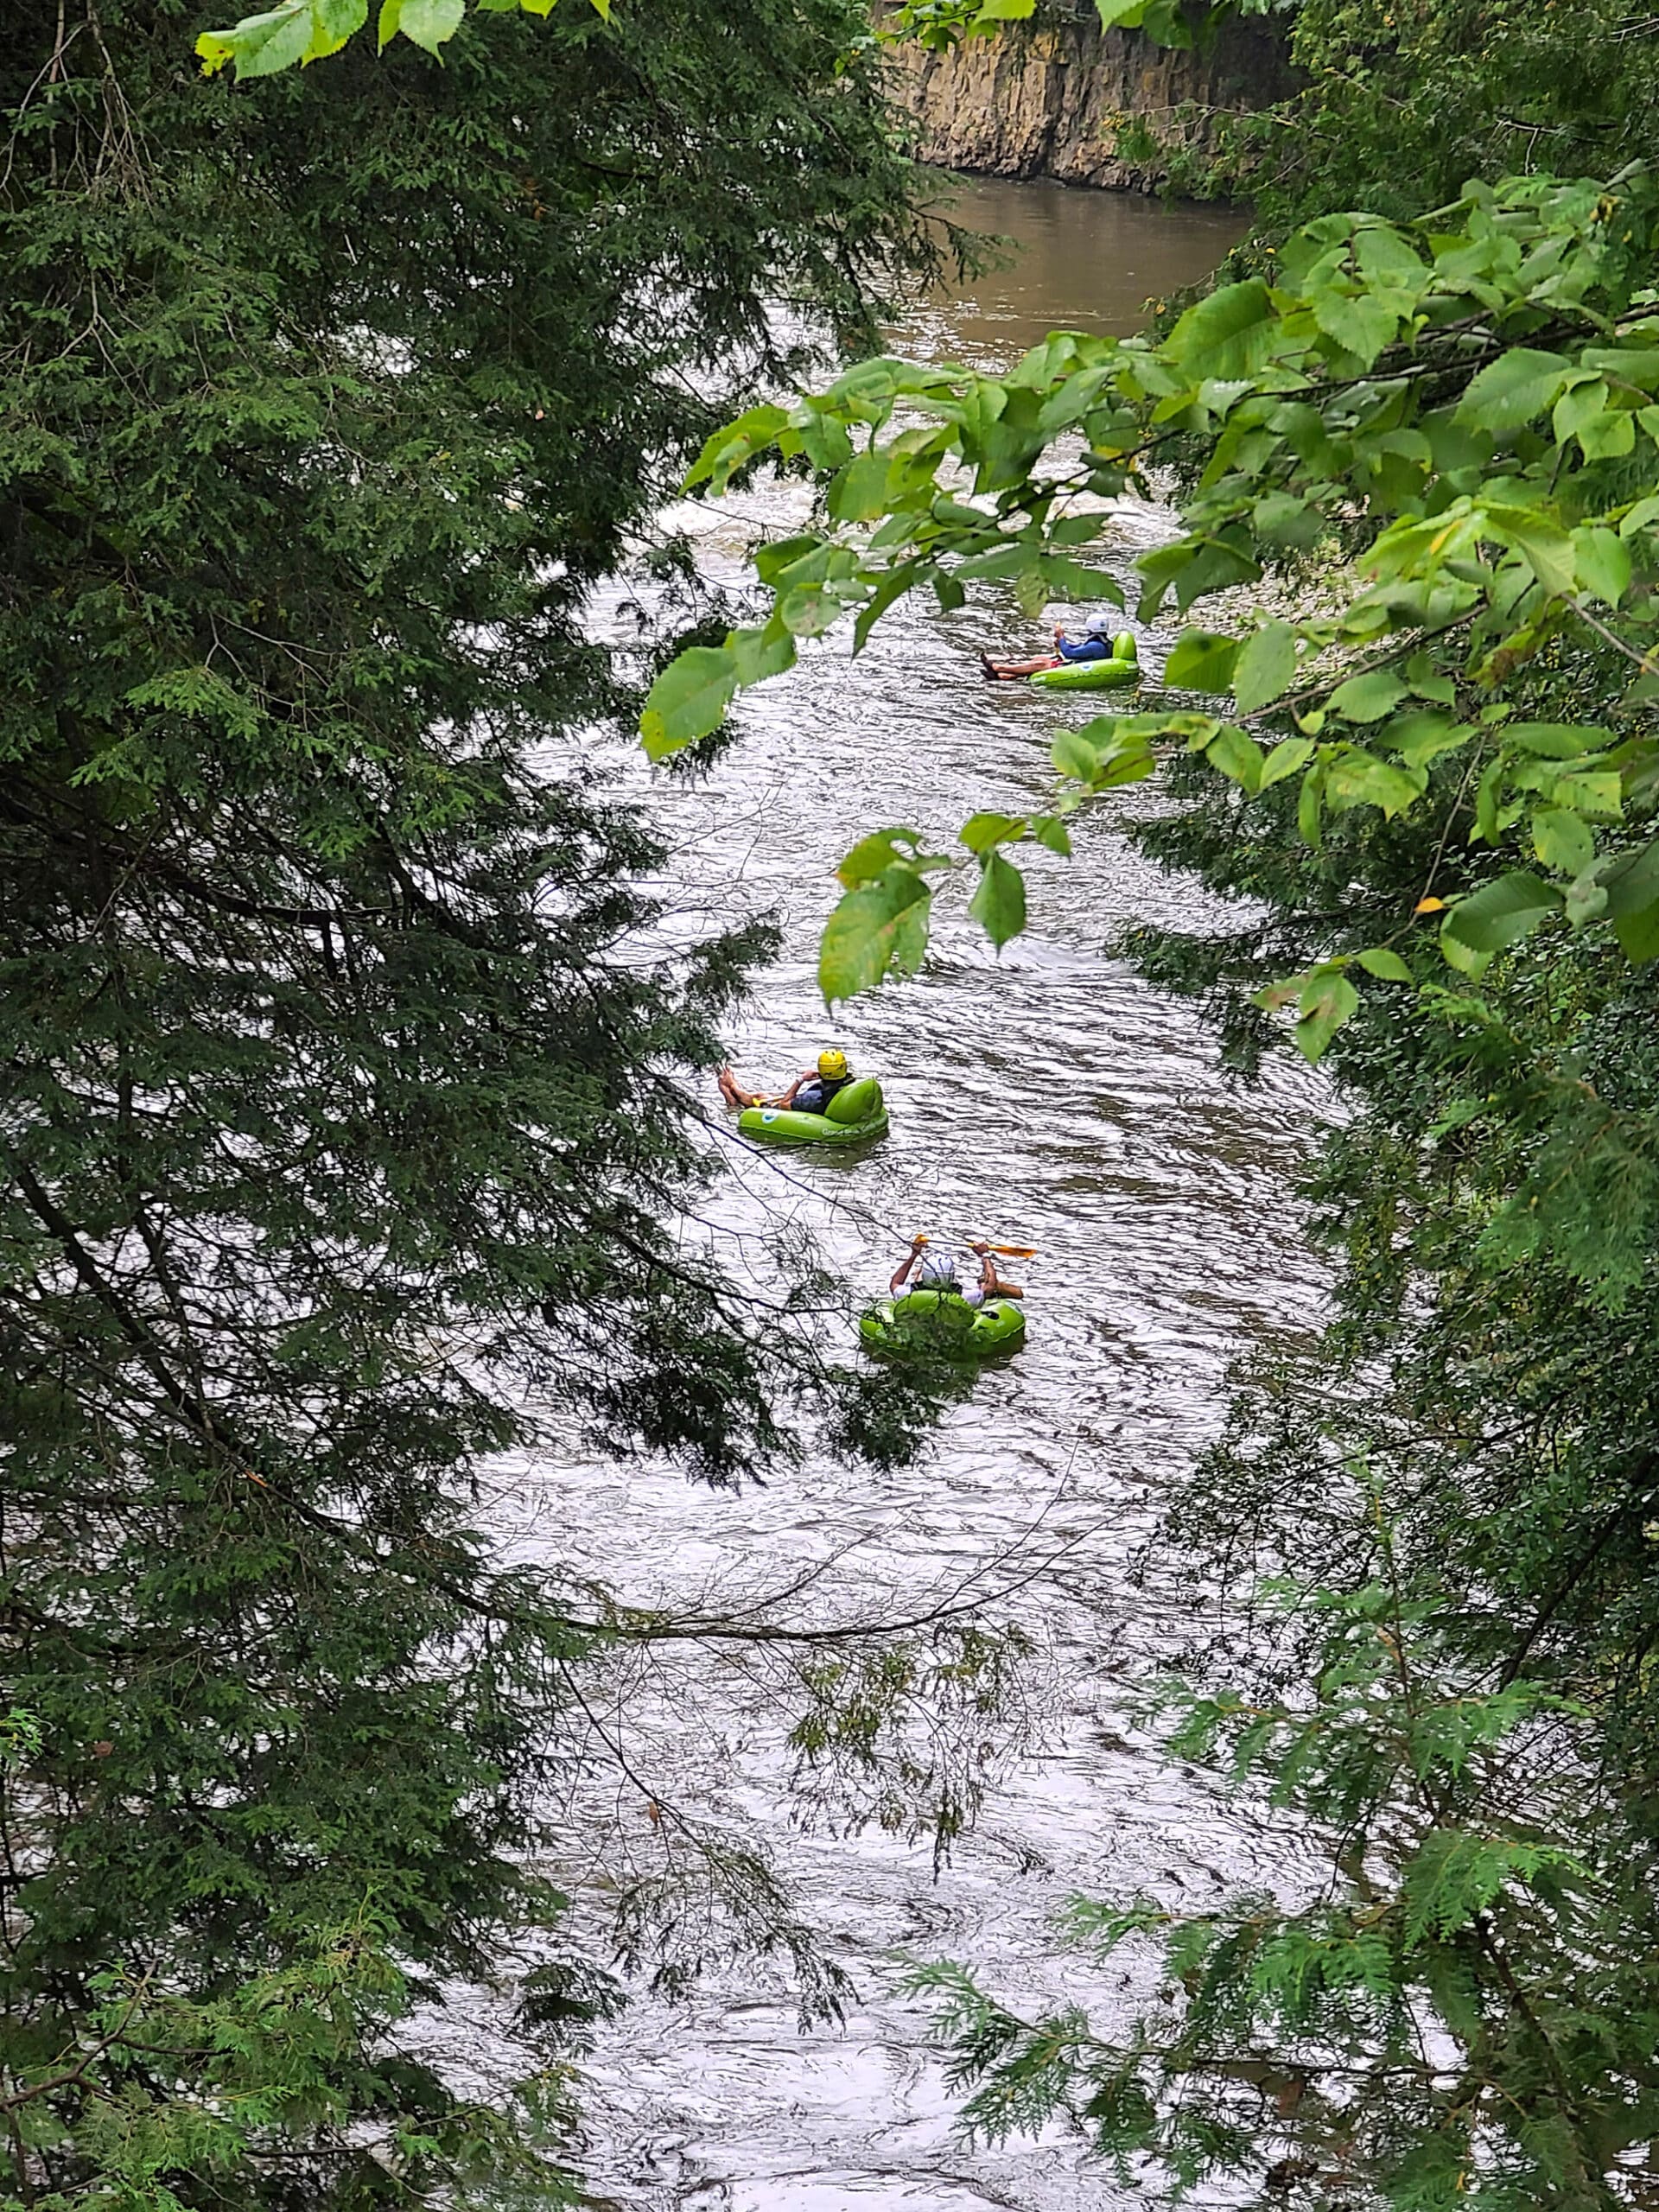 Overhead view of people tubing through Elora Gorge on bright green inner tubes.